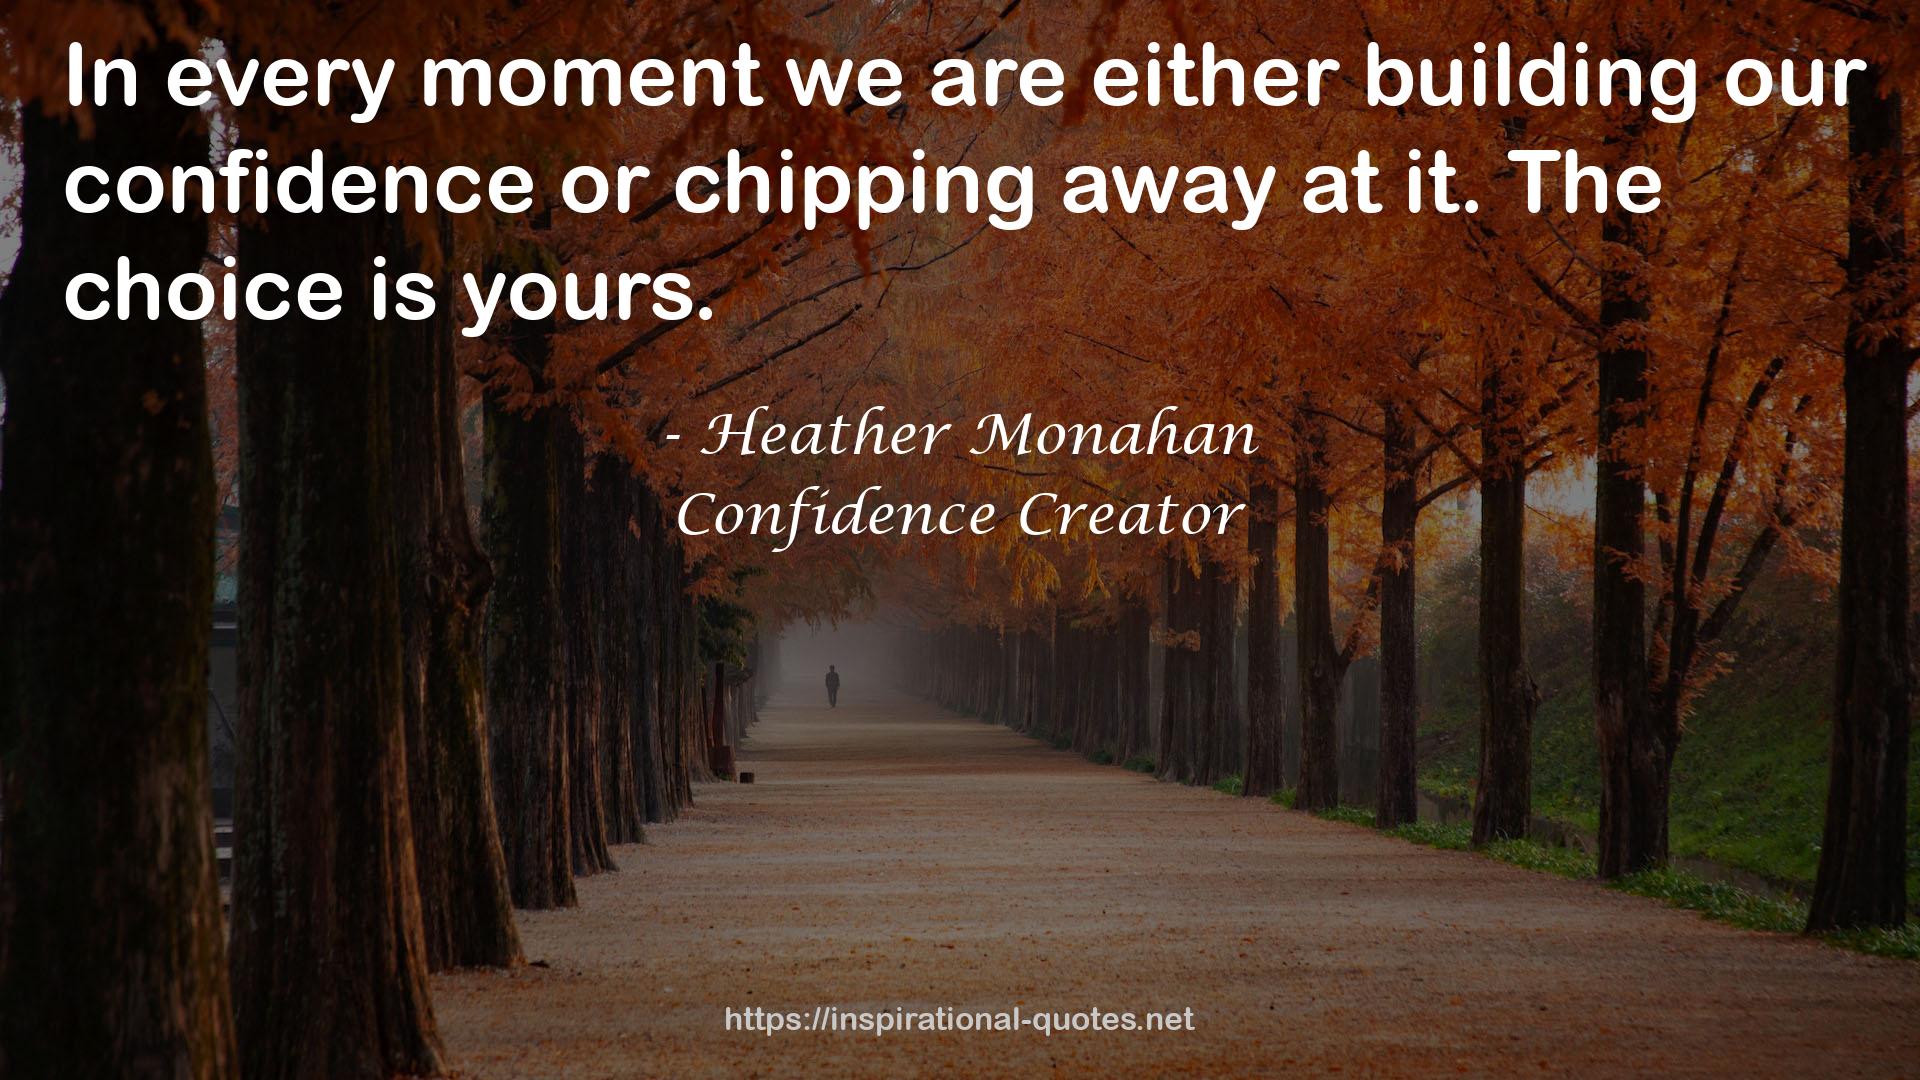 Heather Monahan QUOTES